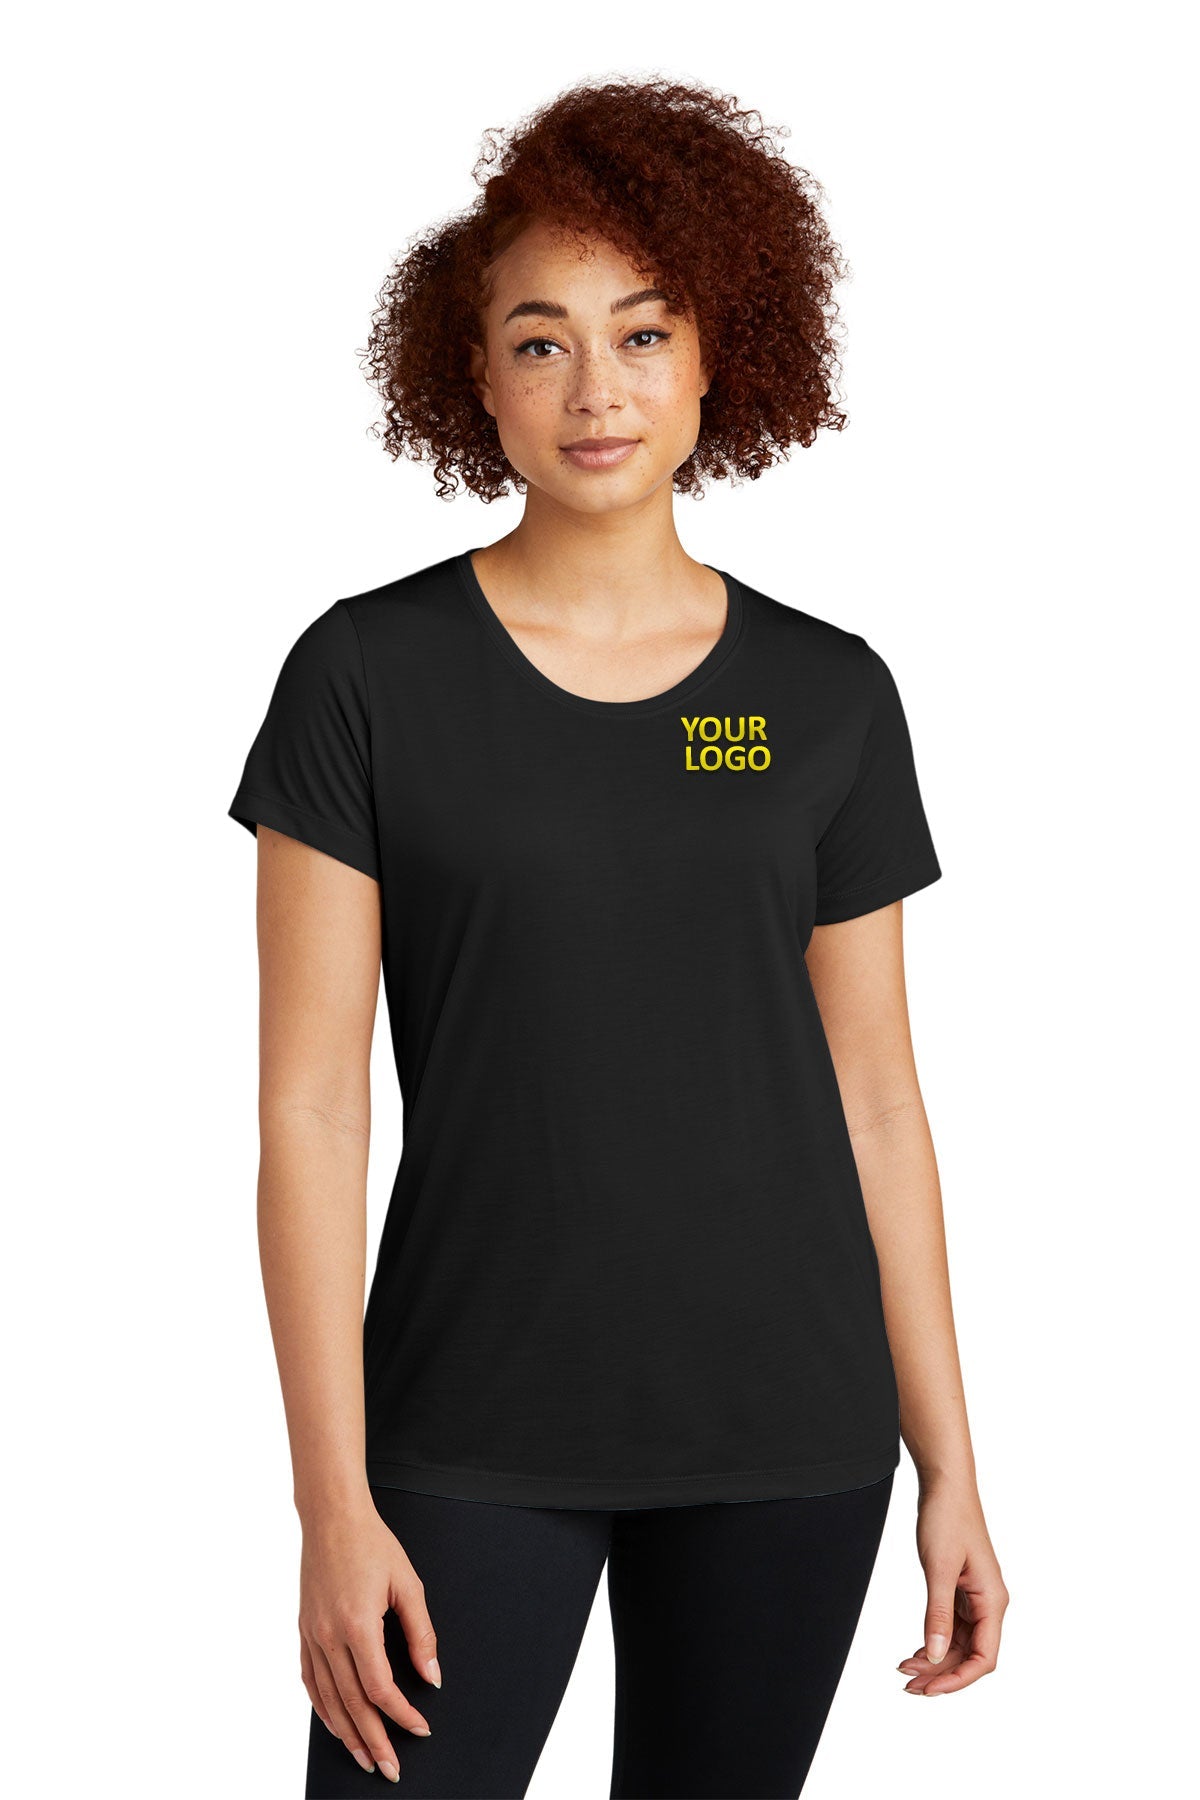 Sport-Tek Ladies PosiCharge Competitor Cotton Touch Branded Scoop Neck Tee's, Black